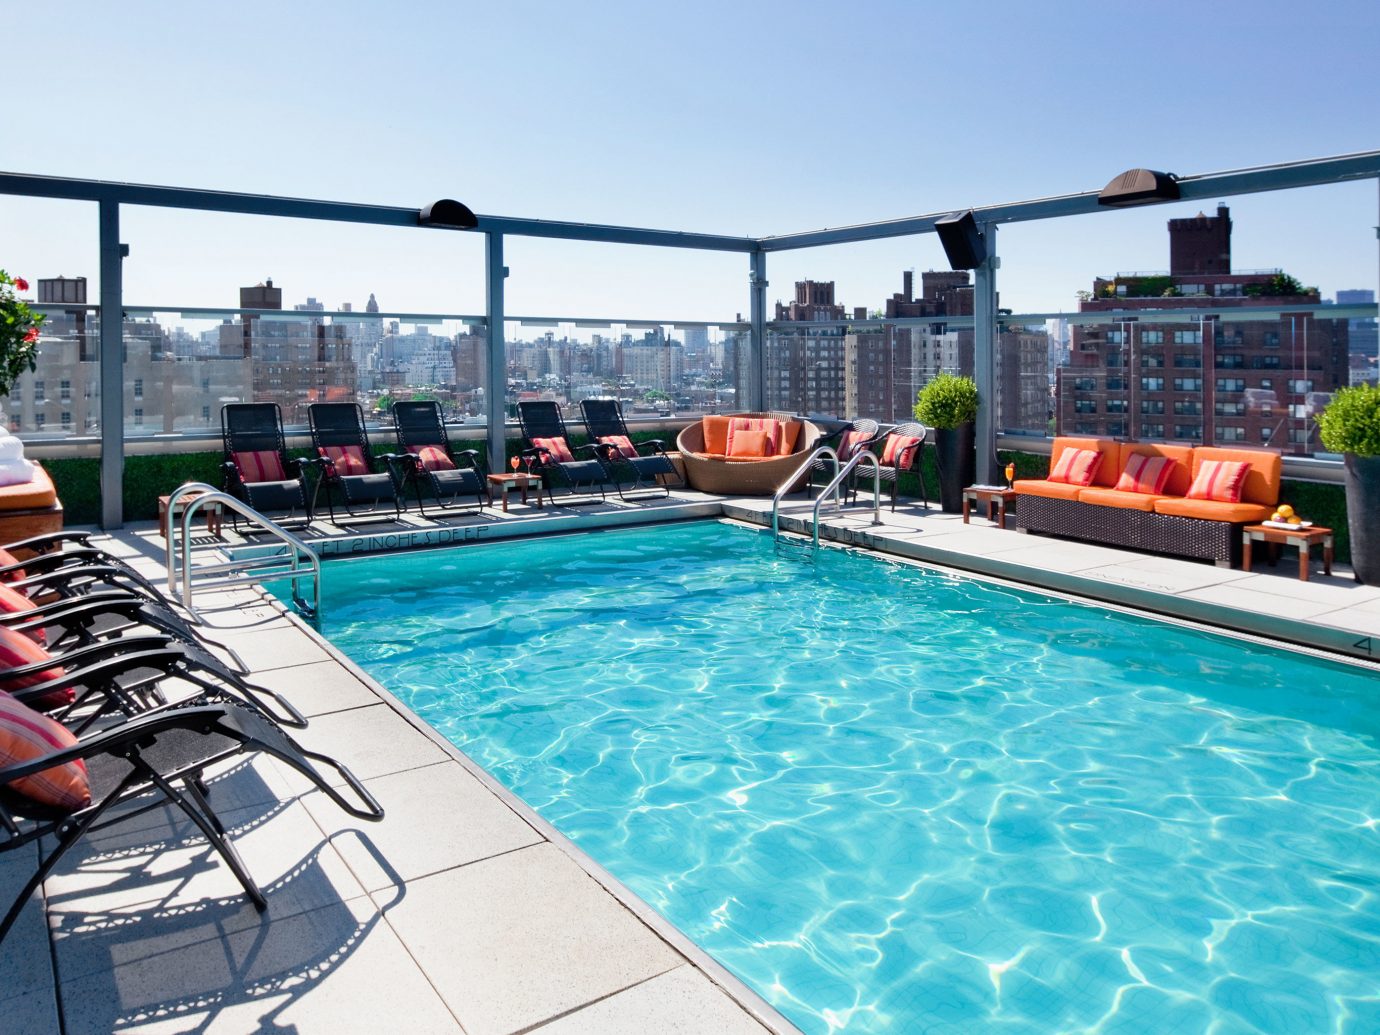 Hotels With Rooftop Pools Nyc - Wildcard Reining